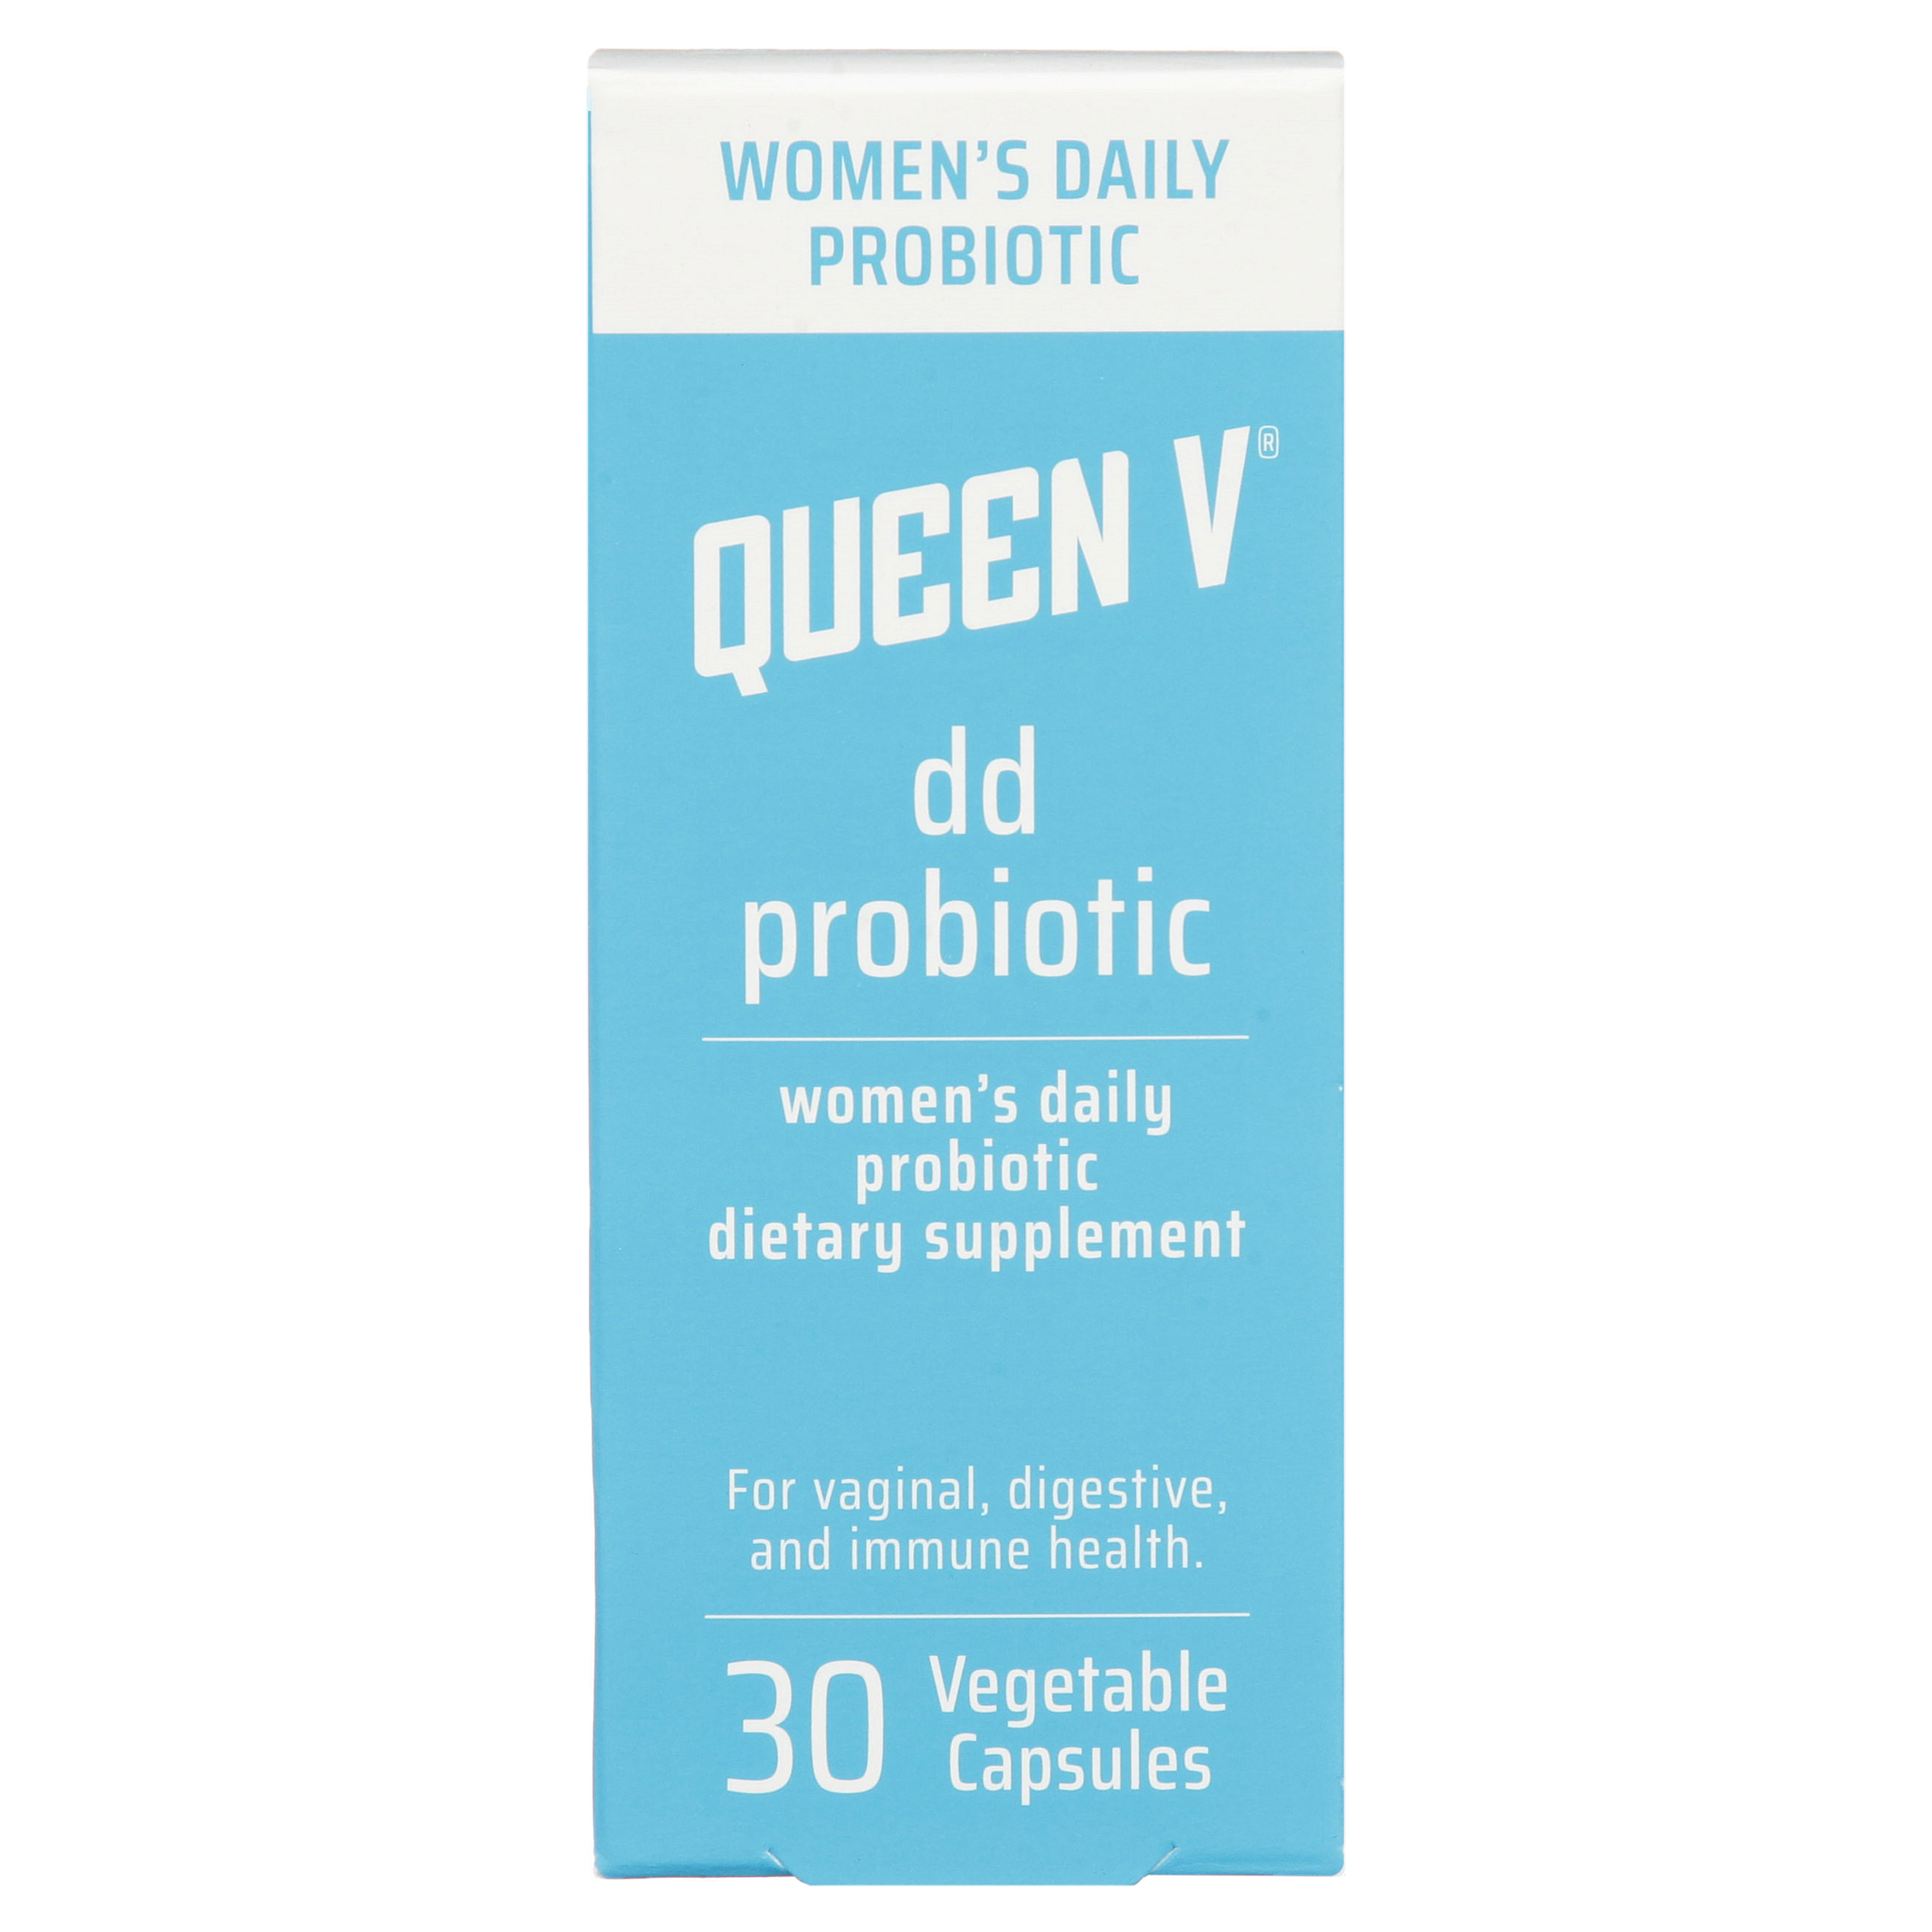 Queen V DD Probiotic Daily Vitamins, Balances Yeast & Bacteria for Digestive Health 30 Count - image 5 of 9